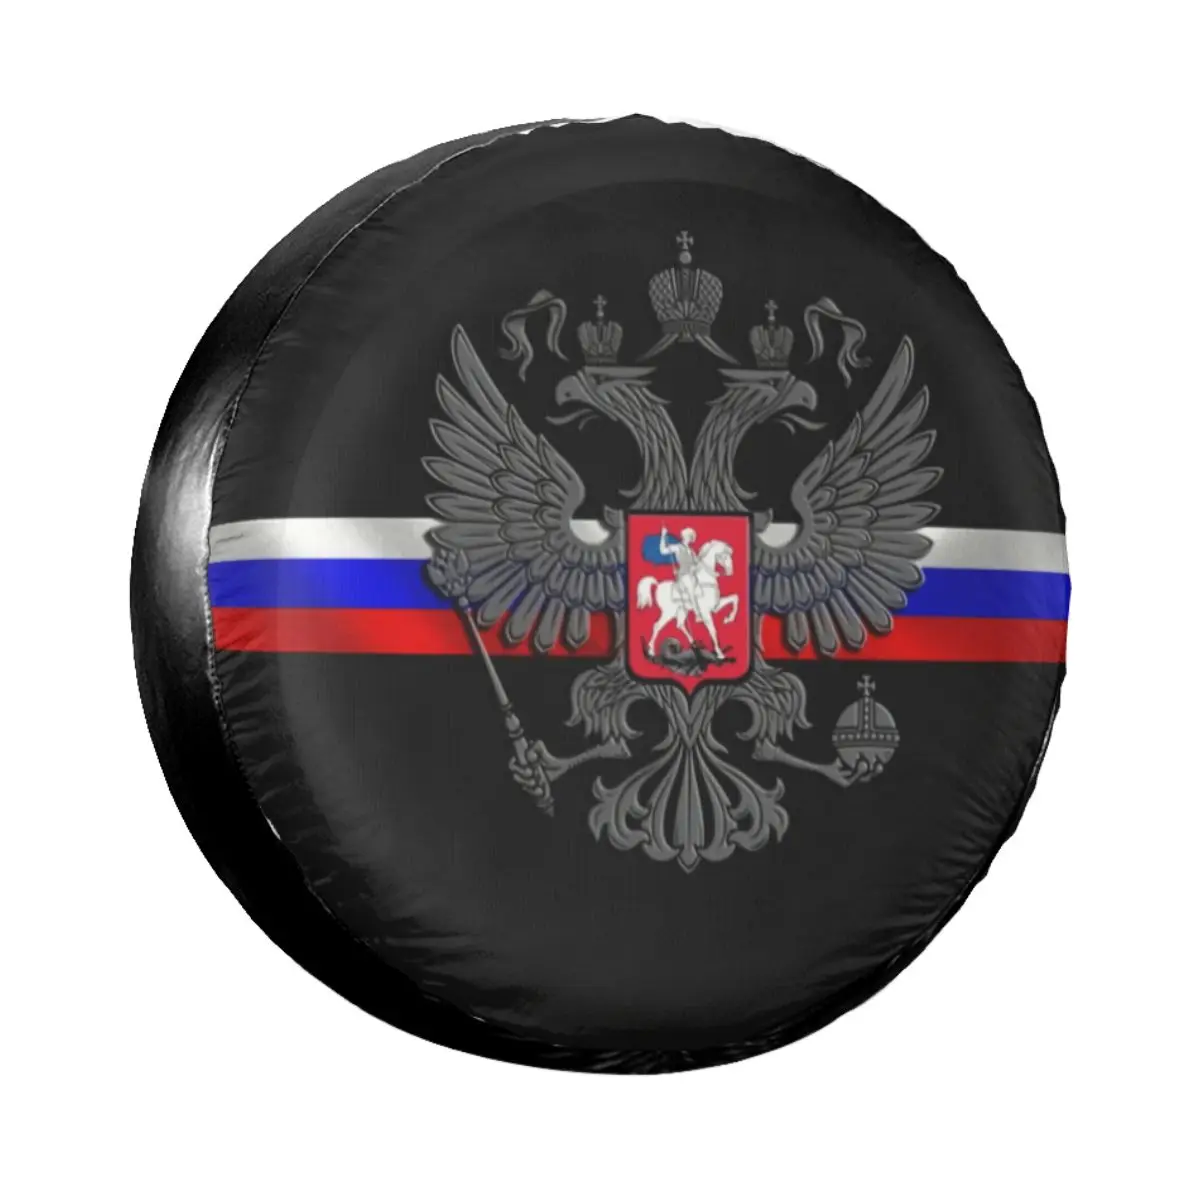 Russia Flag Russian Pride Spare Tire Cover Case Bag Pouch Weatherproof Wheel Covers for Suzuki Mitsubish 14" 15" 16" 17" Inch car shade cover Car Covers